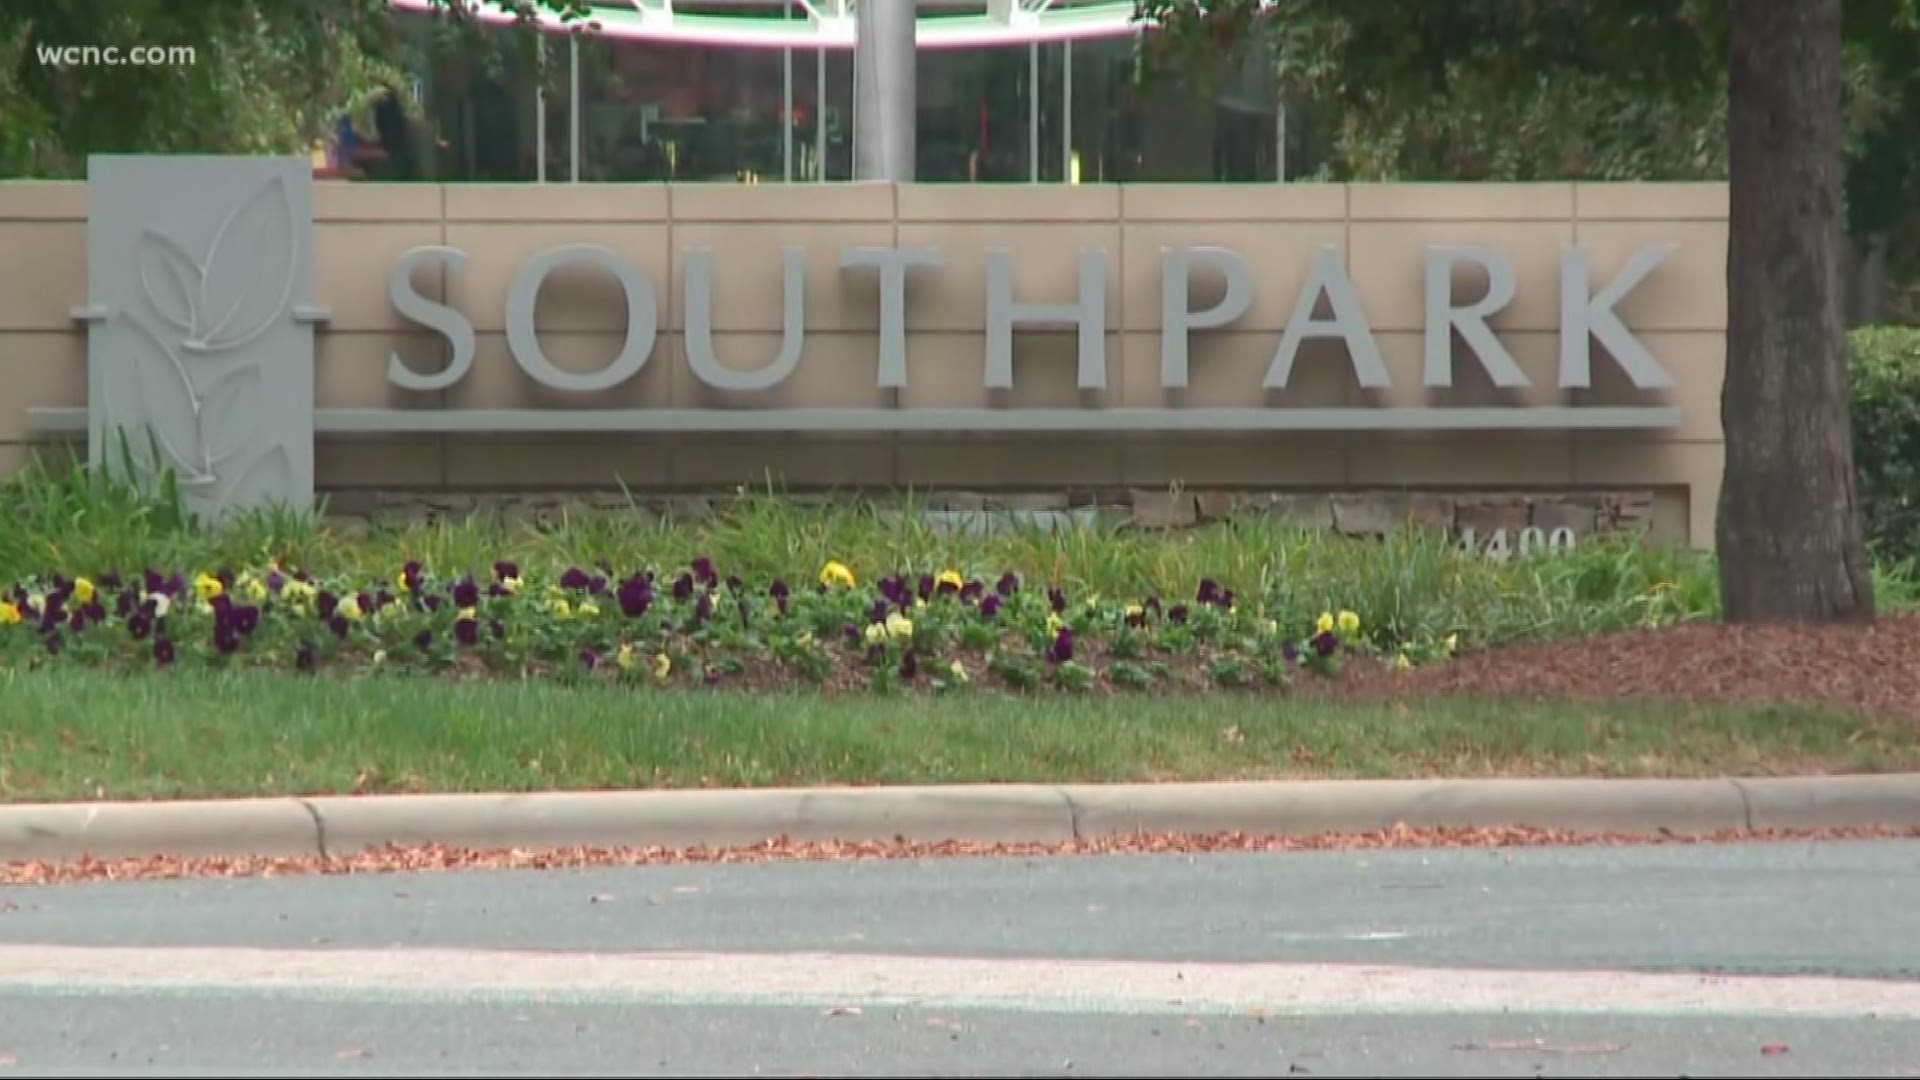 WCNC looked at all crimes within 1,000 feet of the four malls over the past six months.